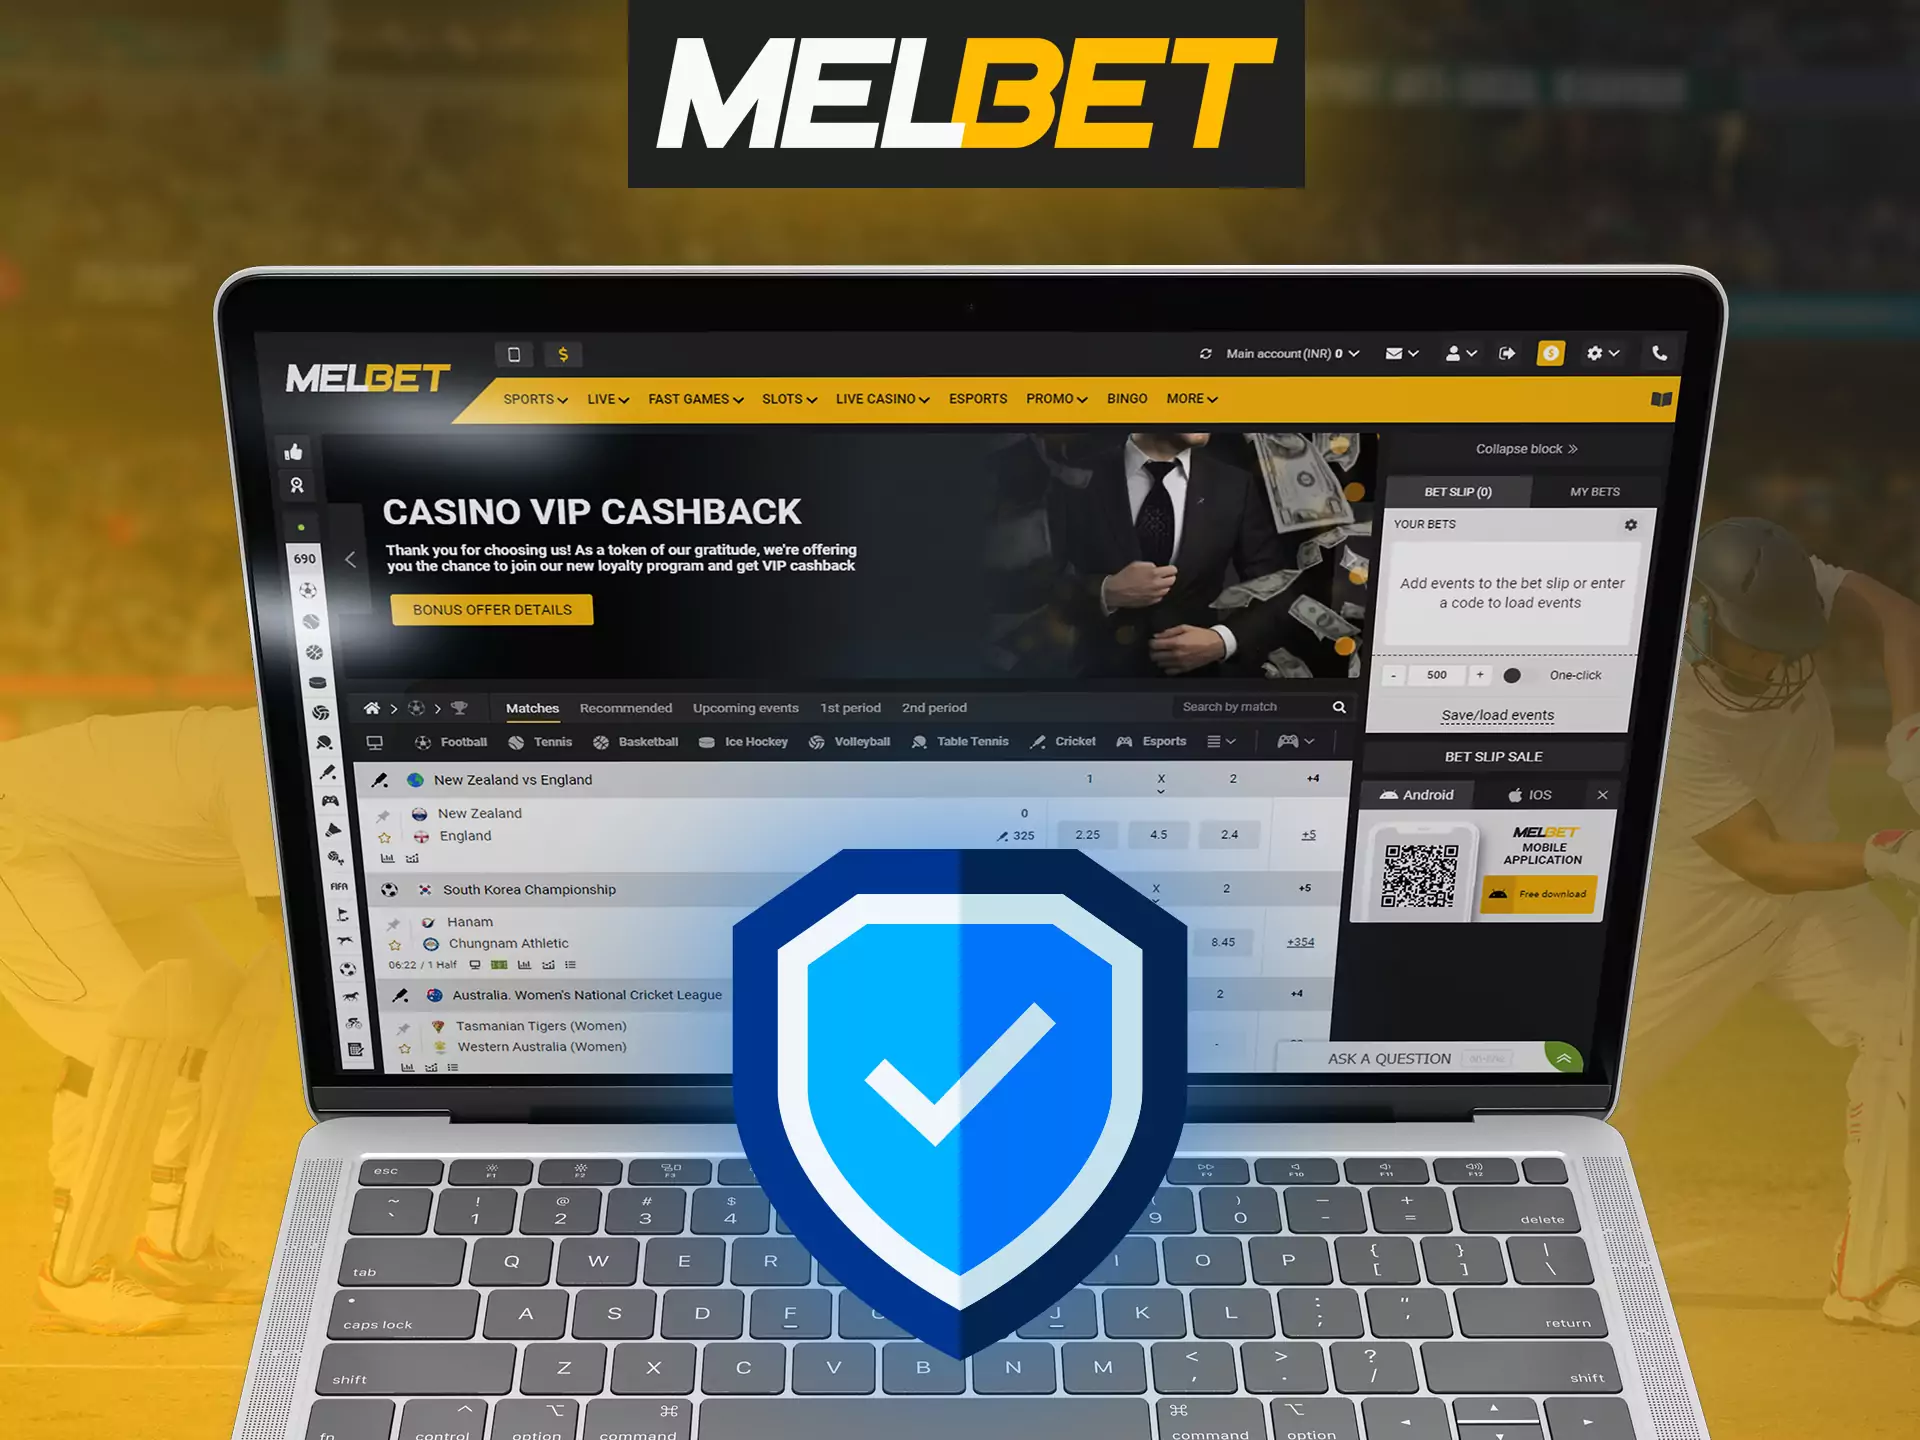 Melbet betting company secures all of your private data.